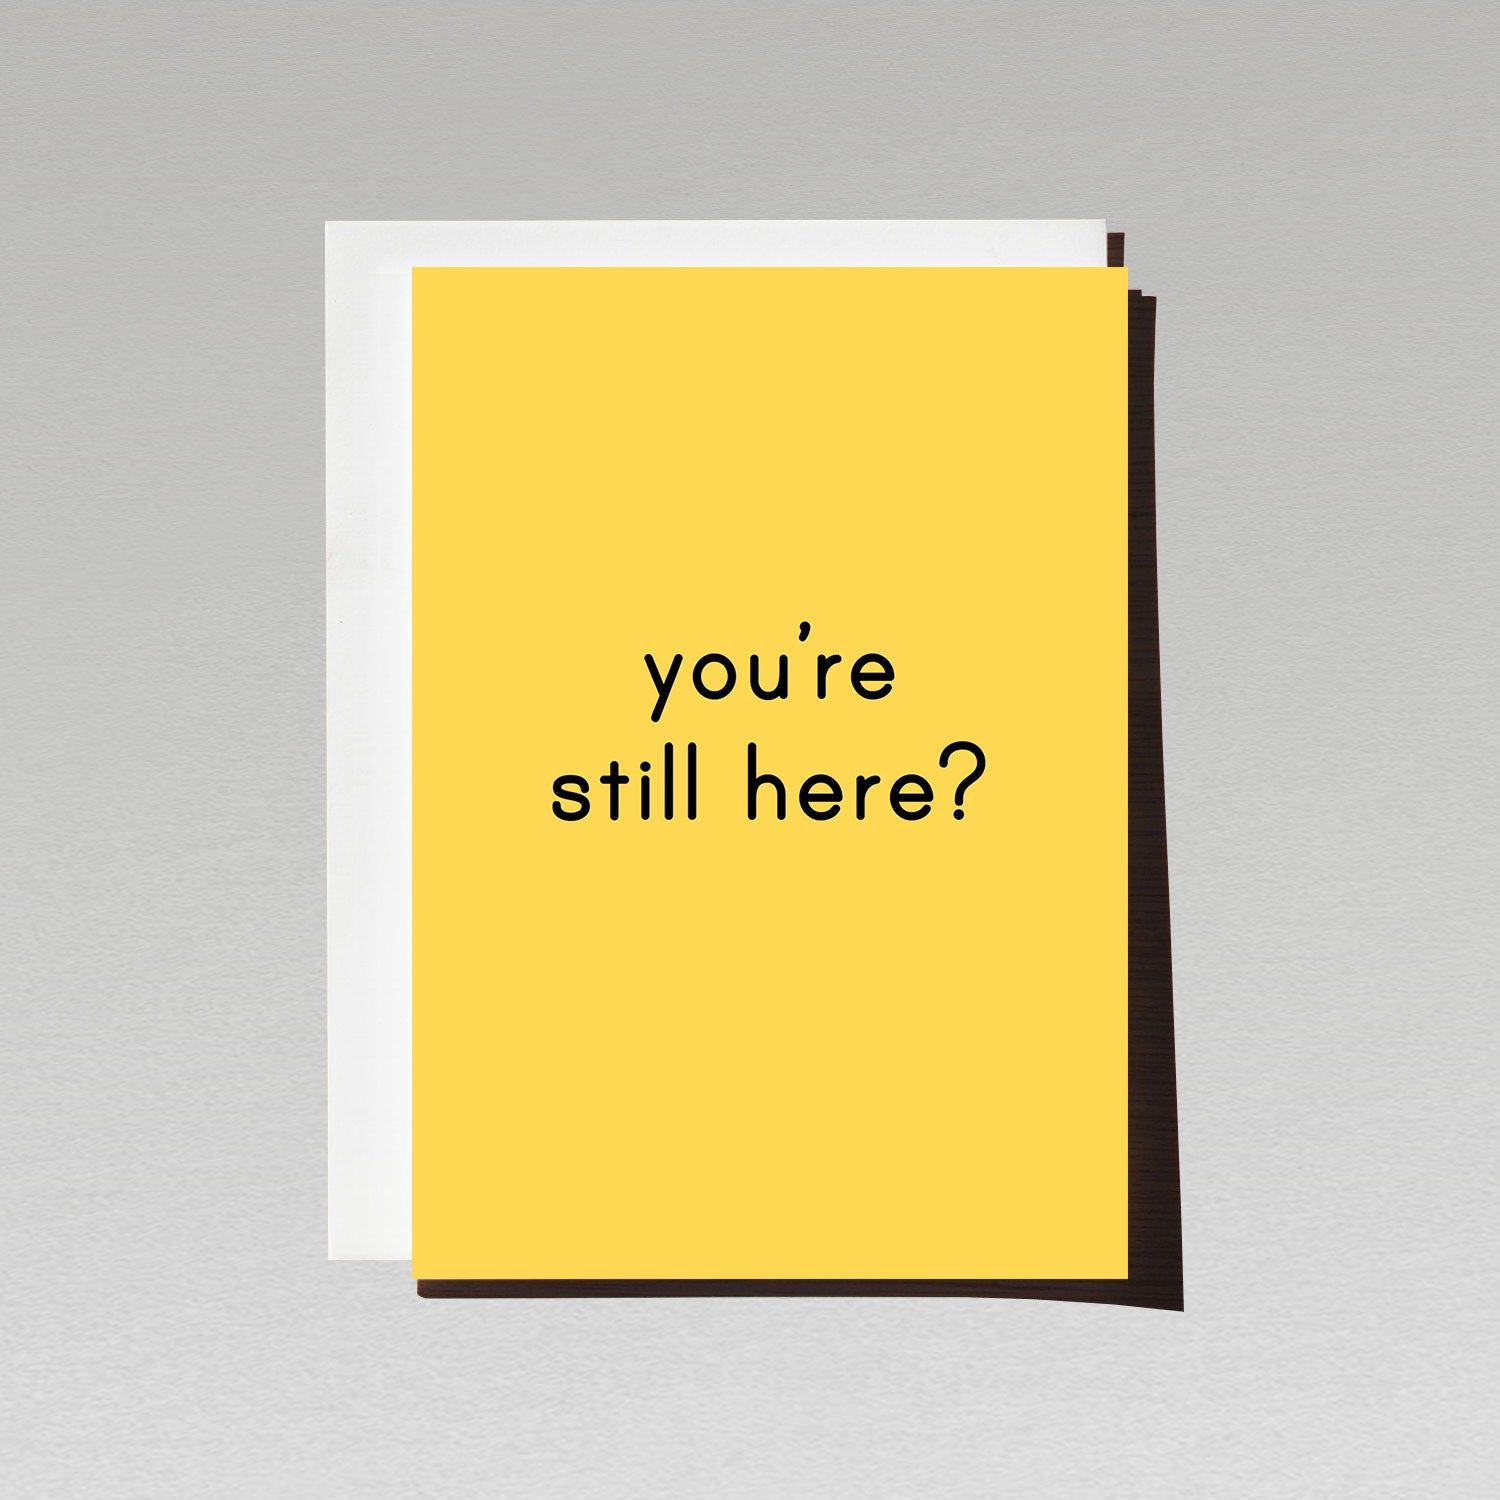 Greeting card with minimalist white text youre still here? on yellow background